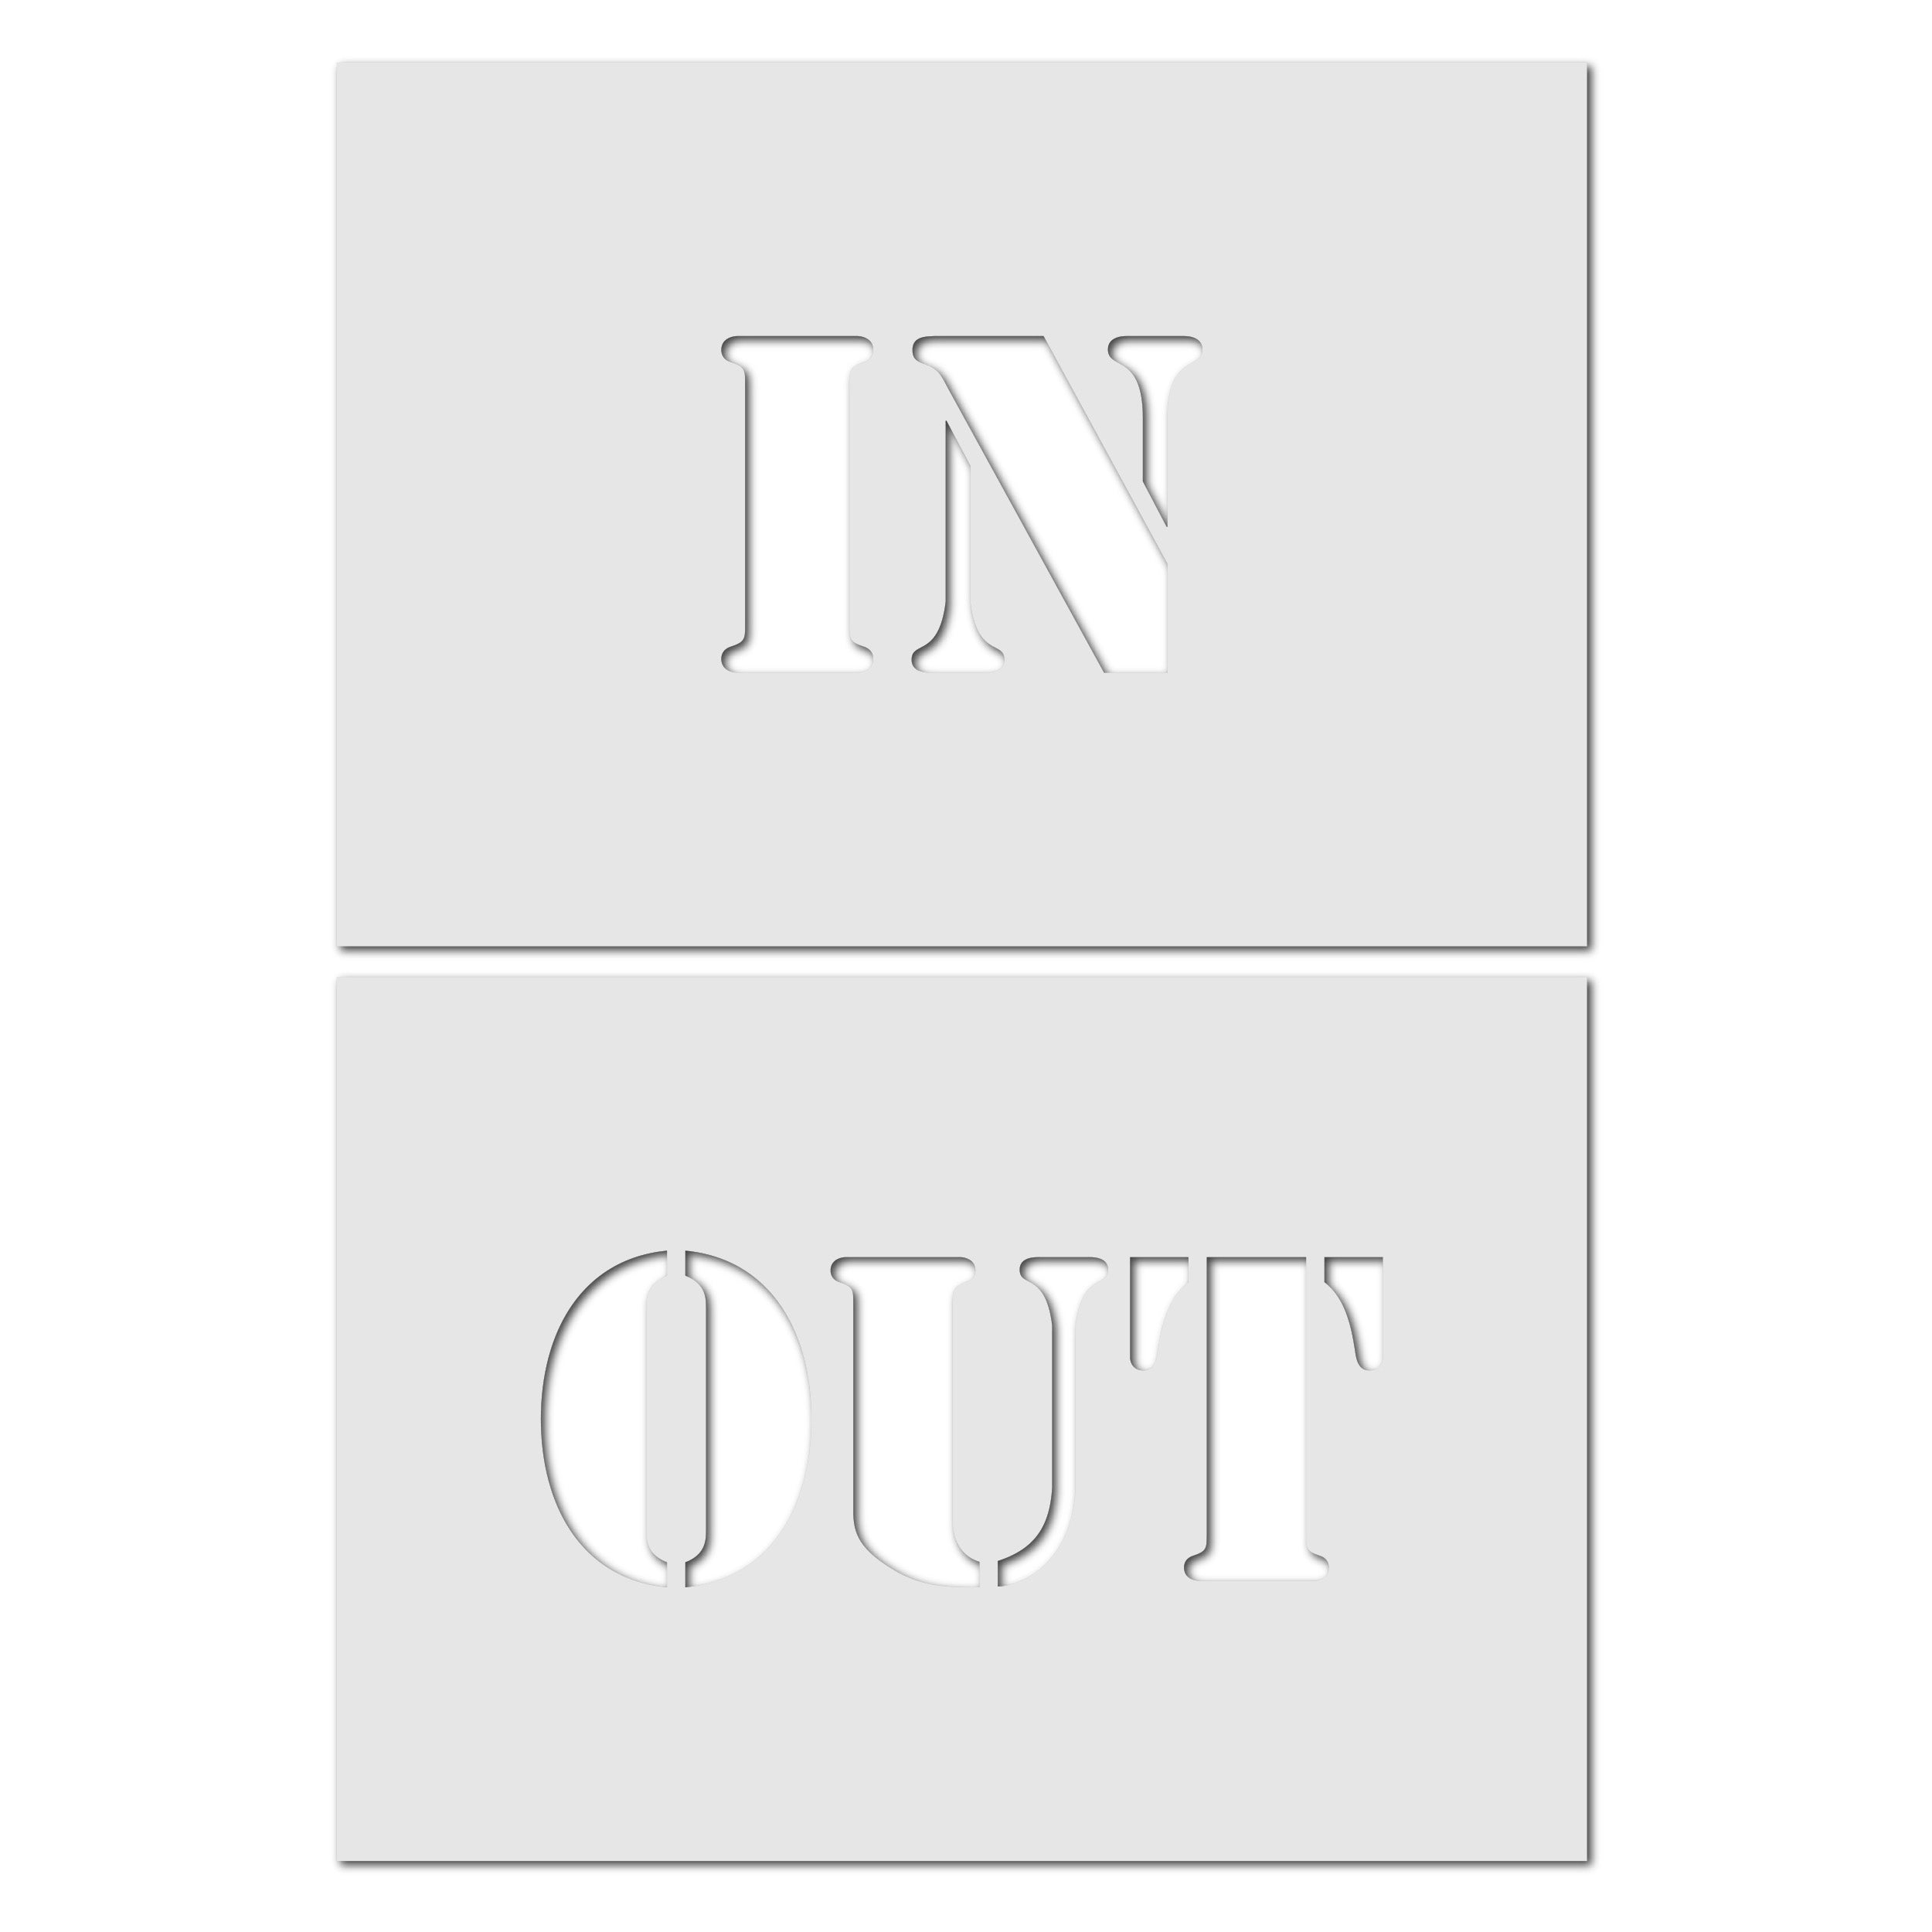 In / Out Stencil Sign Template - A4 Craft Template